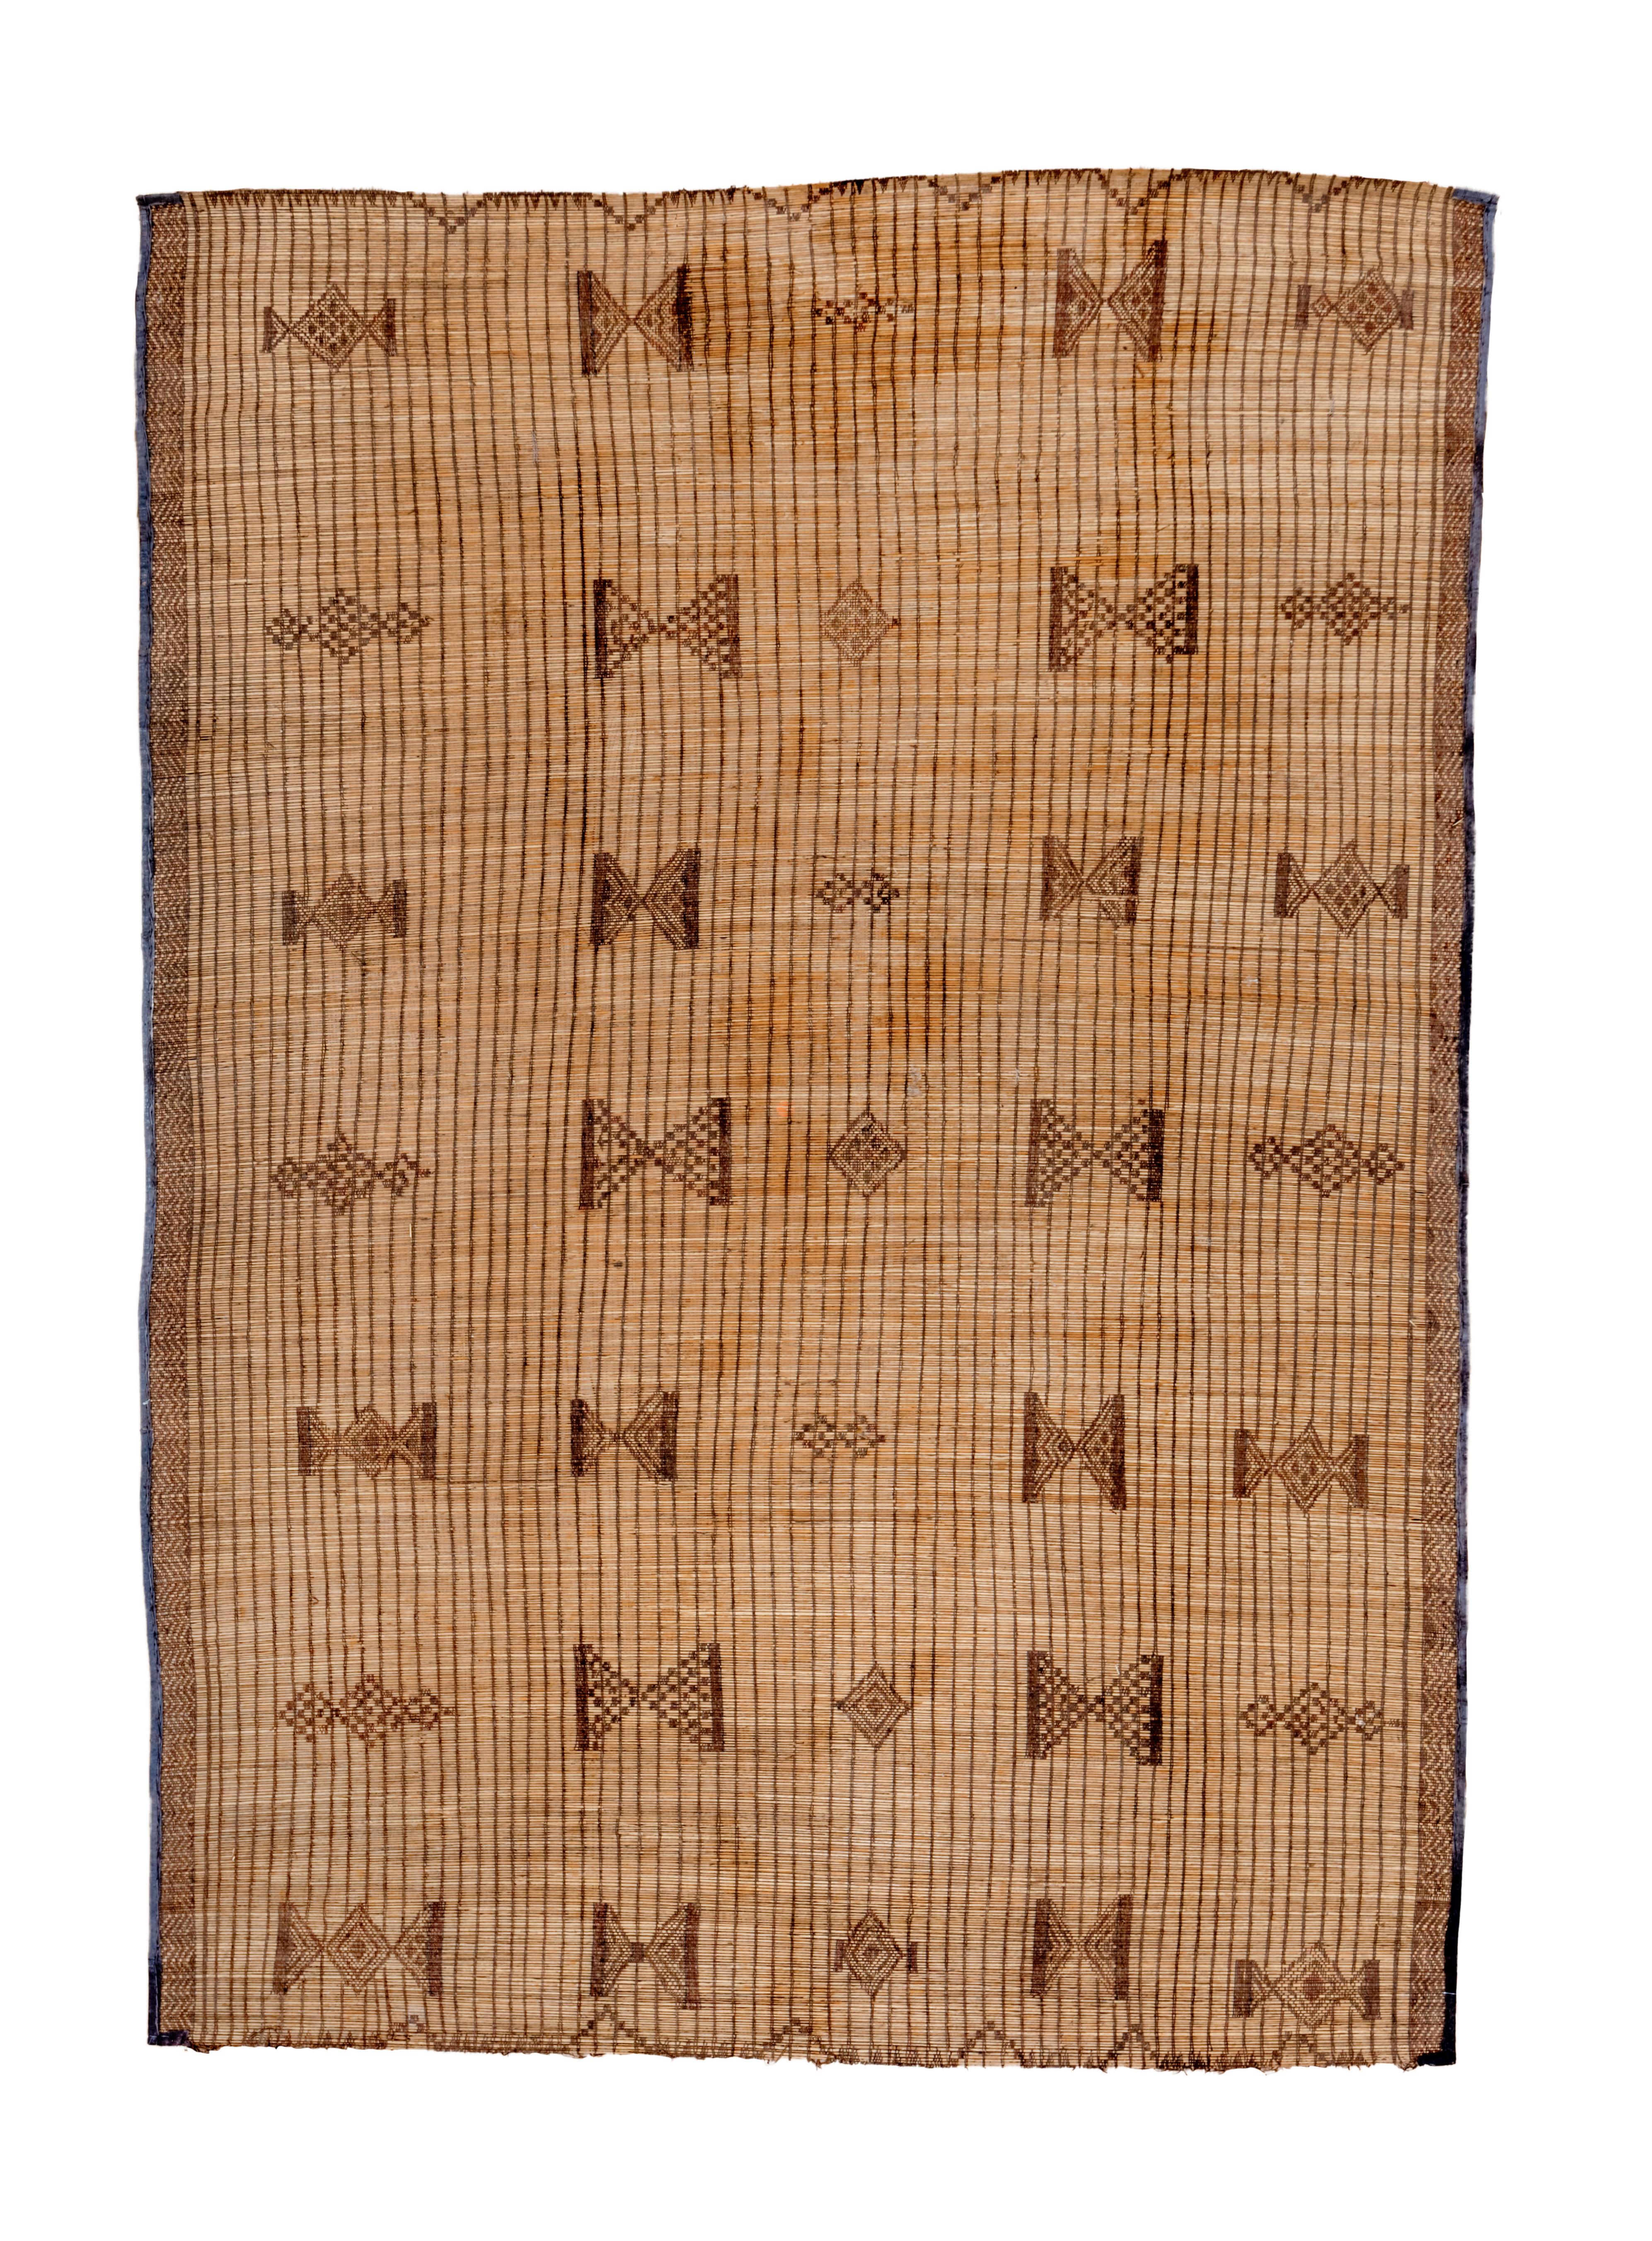 This all-natural flatwoven reed carpet is made by bundling up local reeds in golden tan, and adding shorter brown reeds to make double triangles and other lesser, similar geometric devices. End borders feature flattened triangles, while the narrow